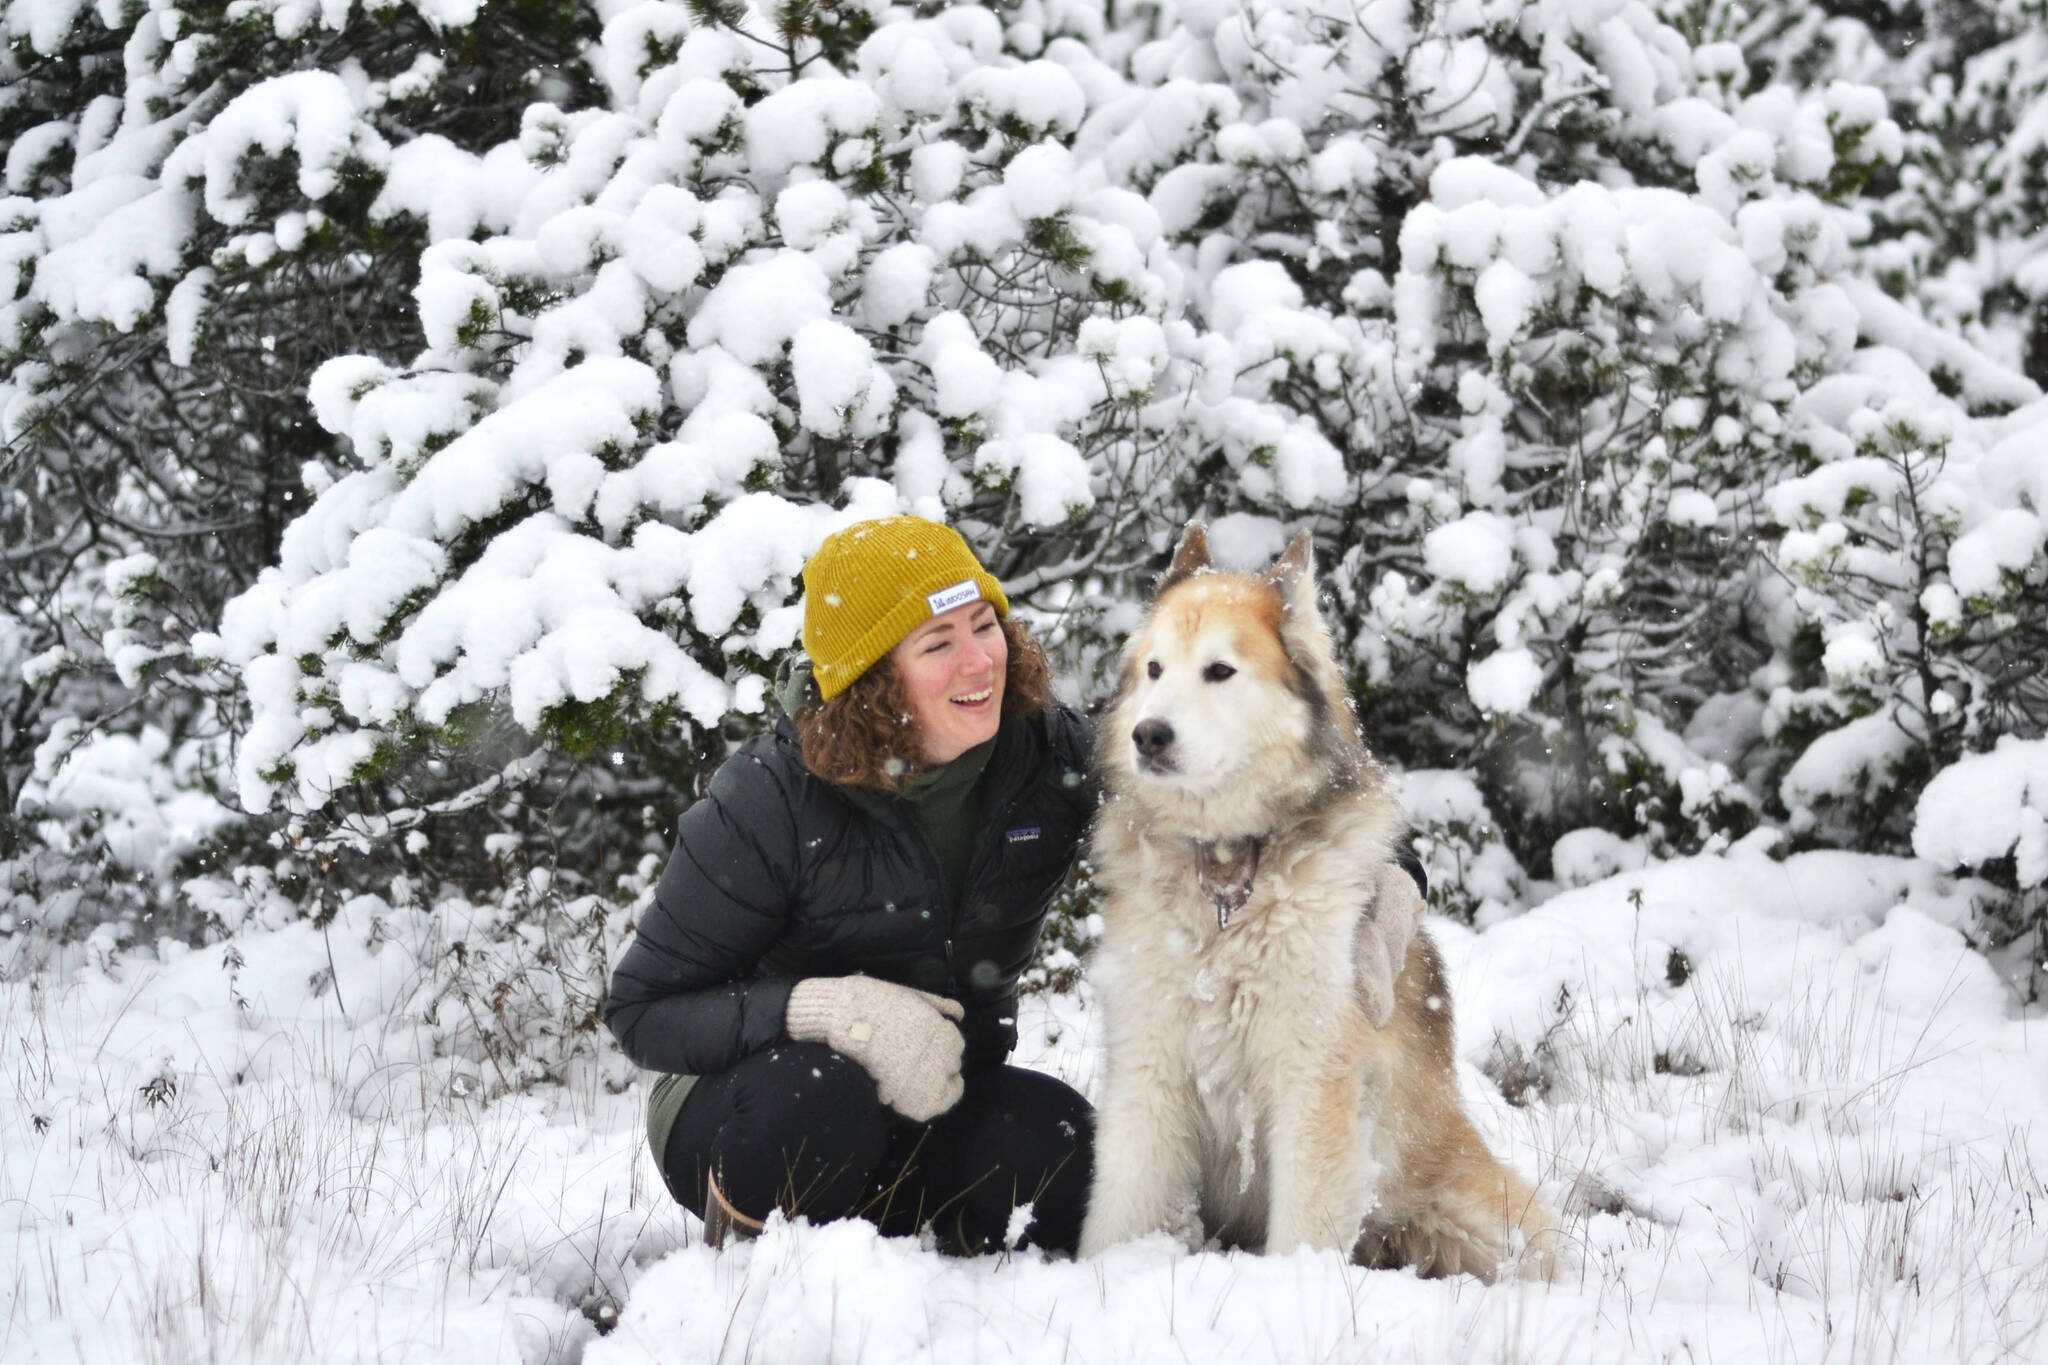 Angie Flickinger and Togiak in the forest in Wrangell. (Courtesy Photo / Alex Freericks)